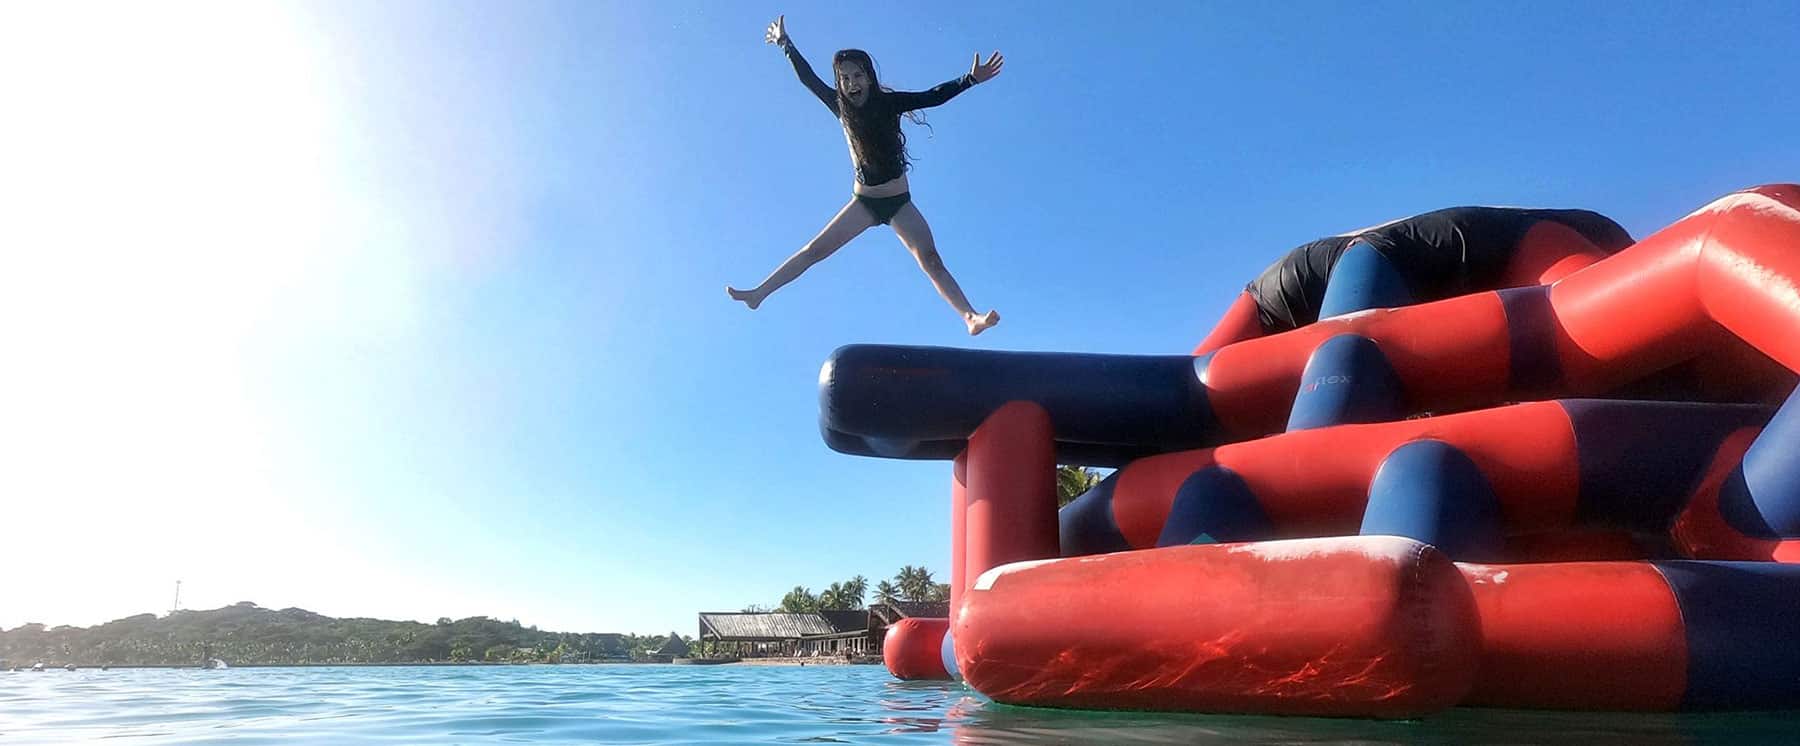 A young woman jumping from the slide, A water and mountain background